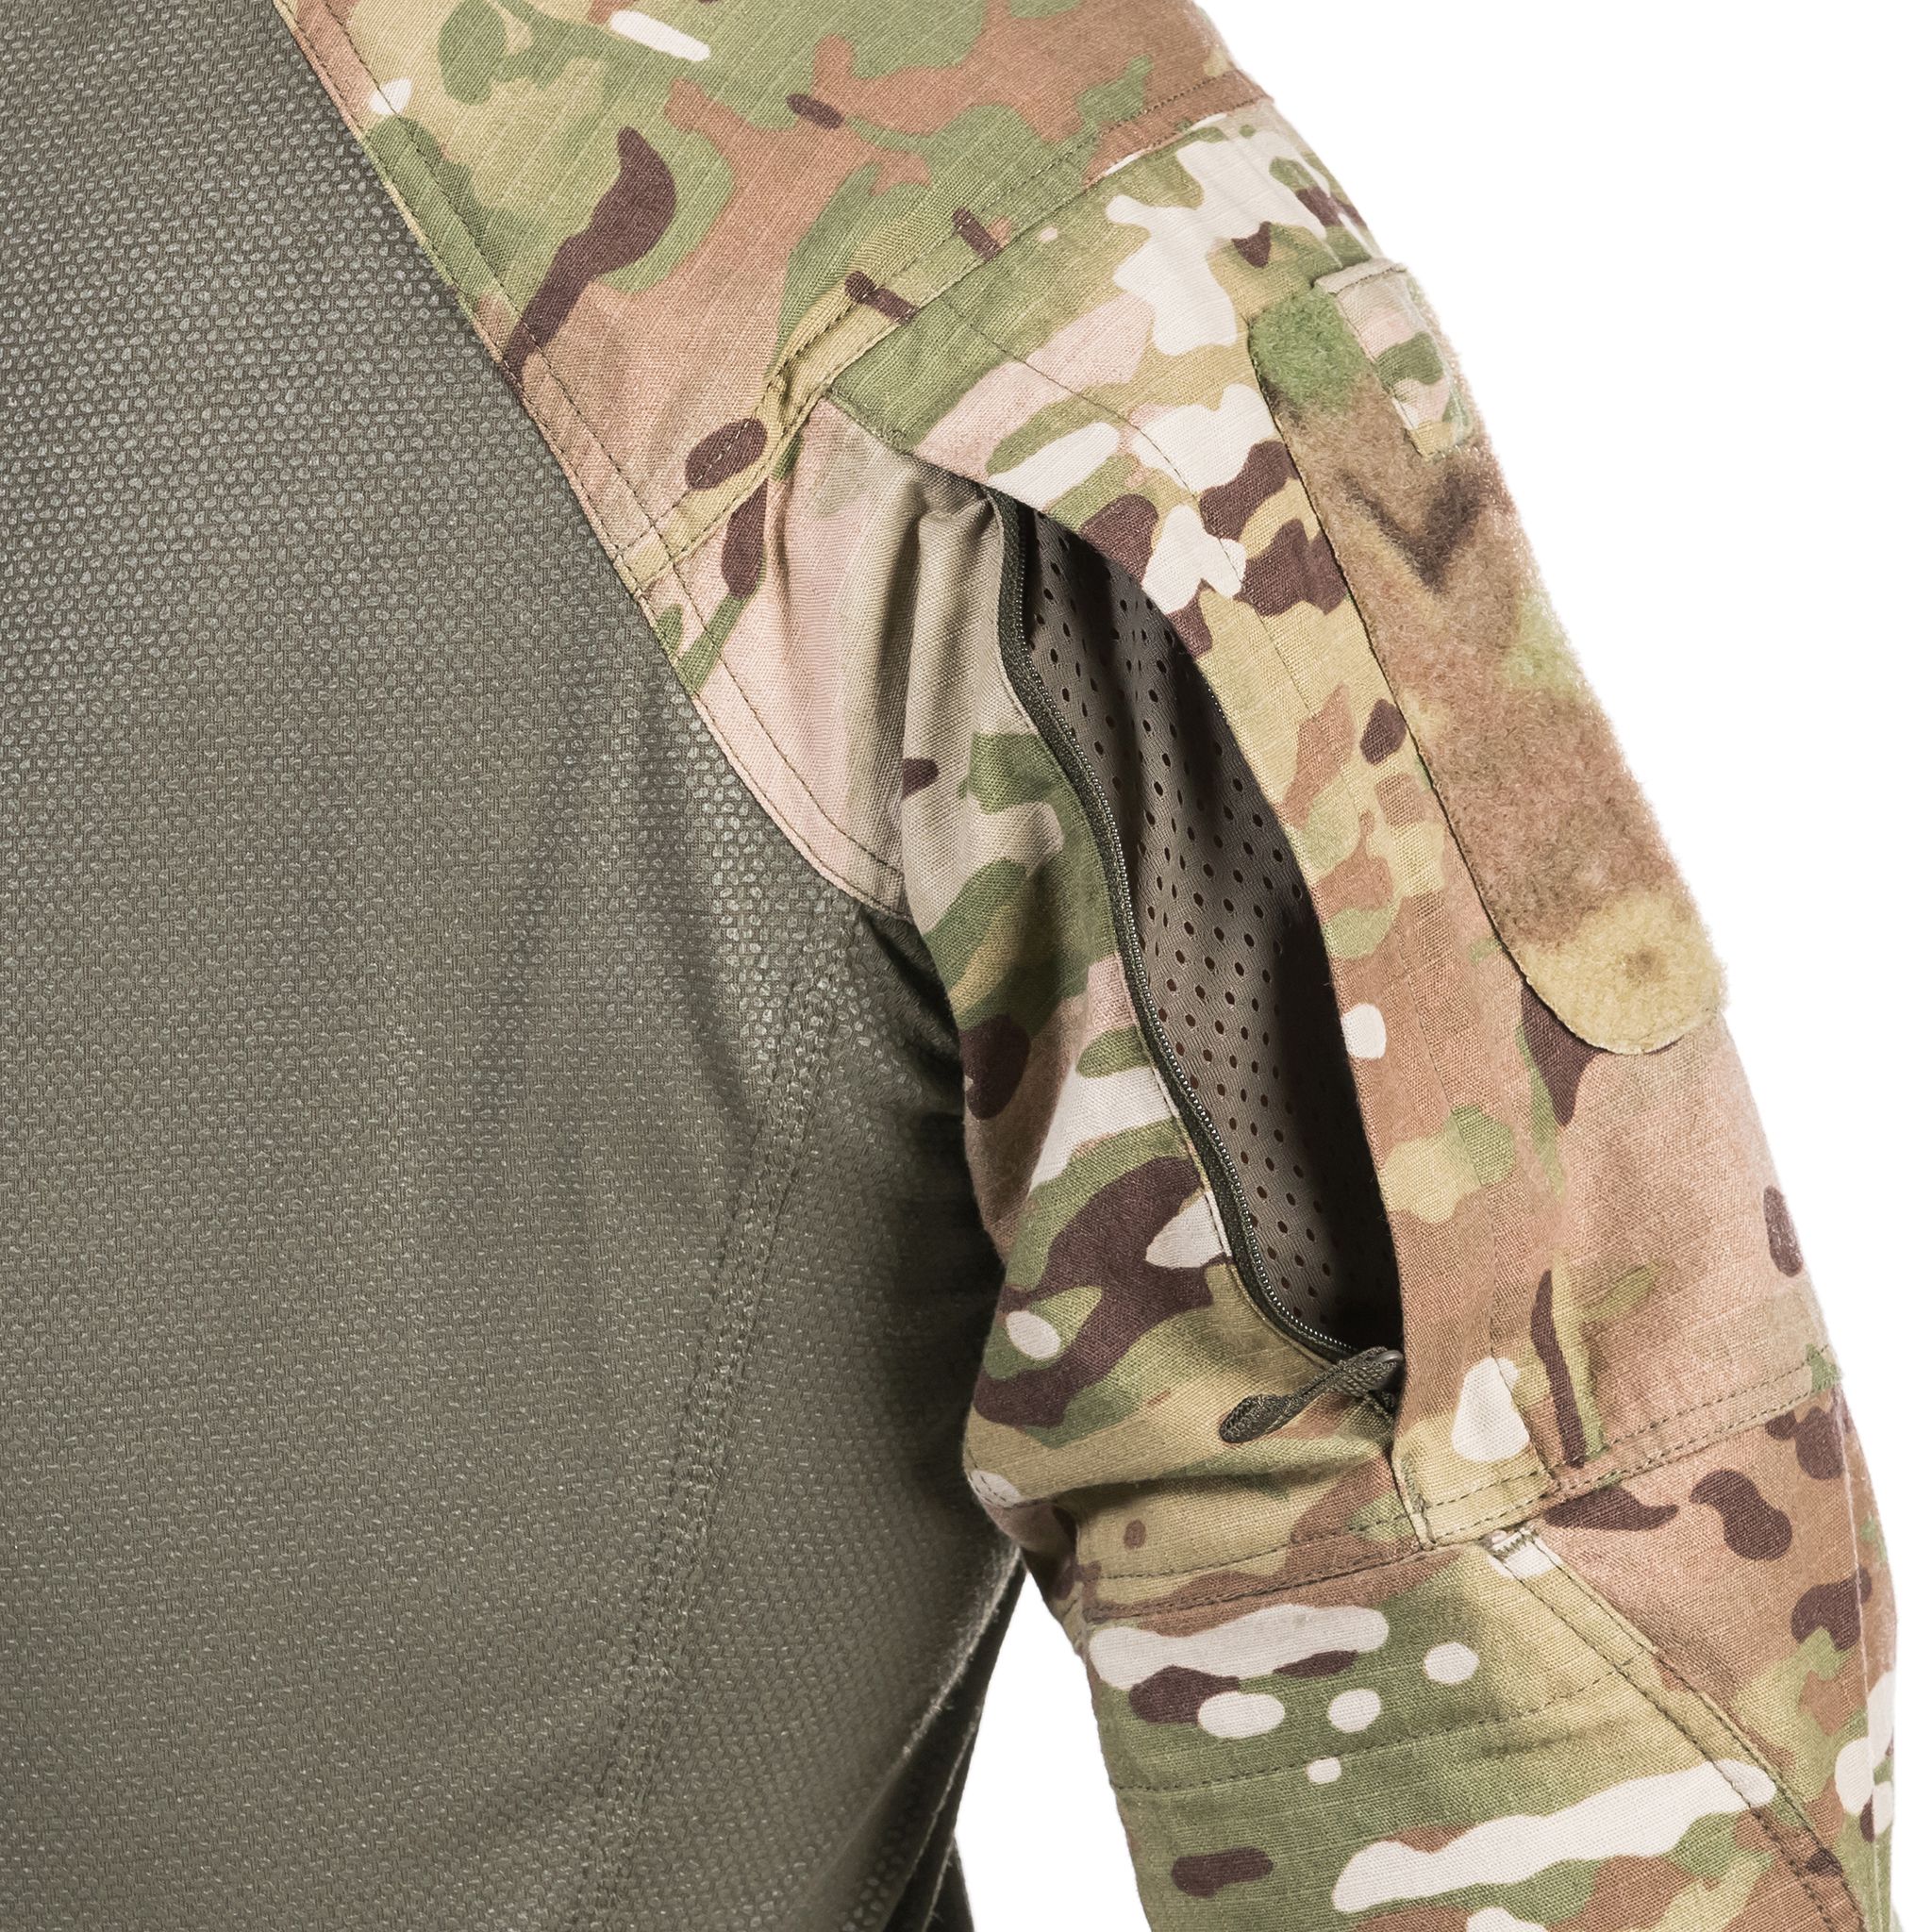  Multicam OCP Camouflage Nylon Cotton Ripstop Fabric 65 Inch  Wide BTY